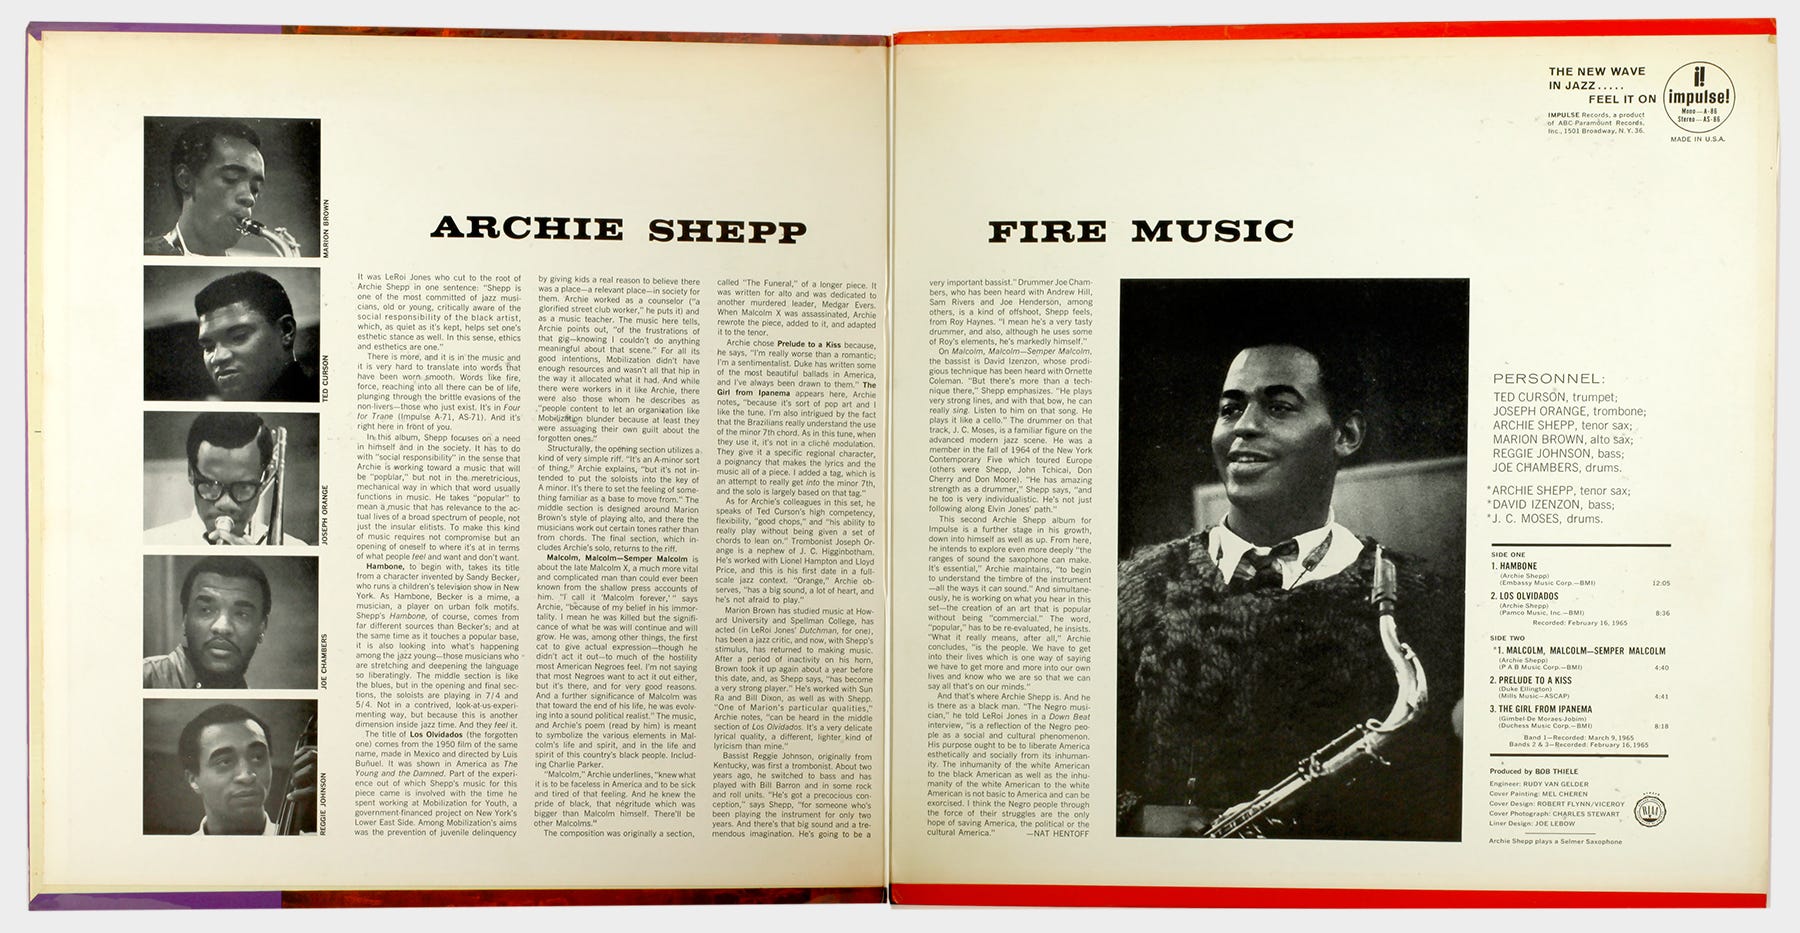 Archie Shepp and Mobilization for Youth, by Pierre Crépon